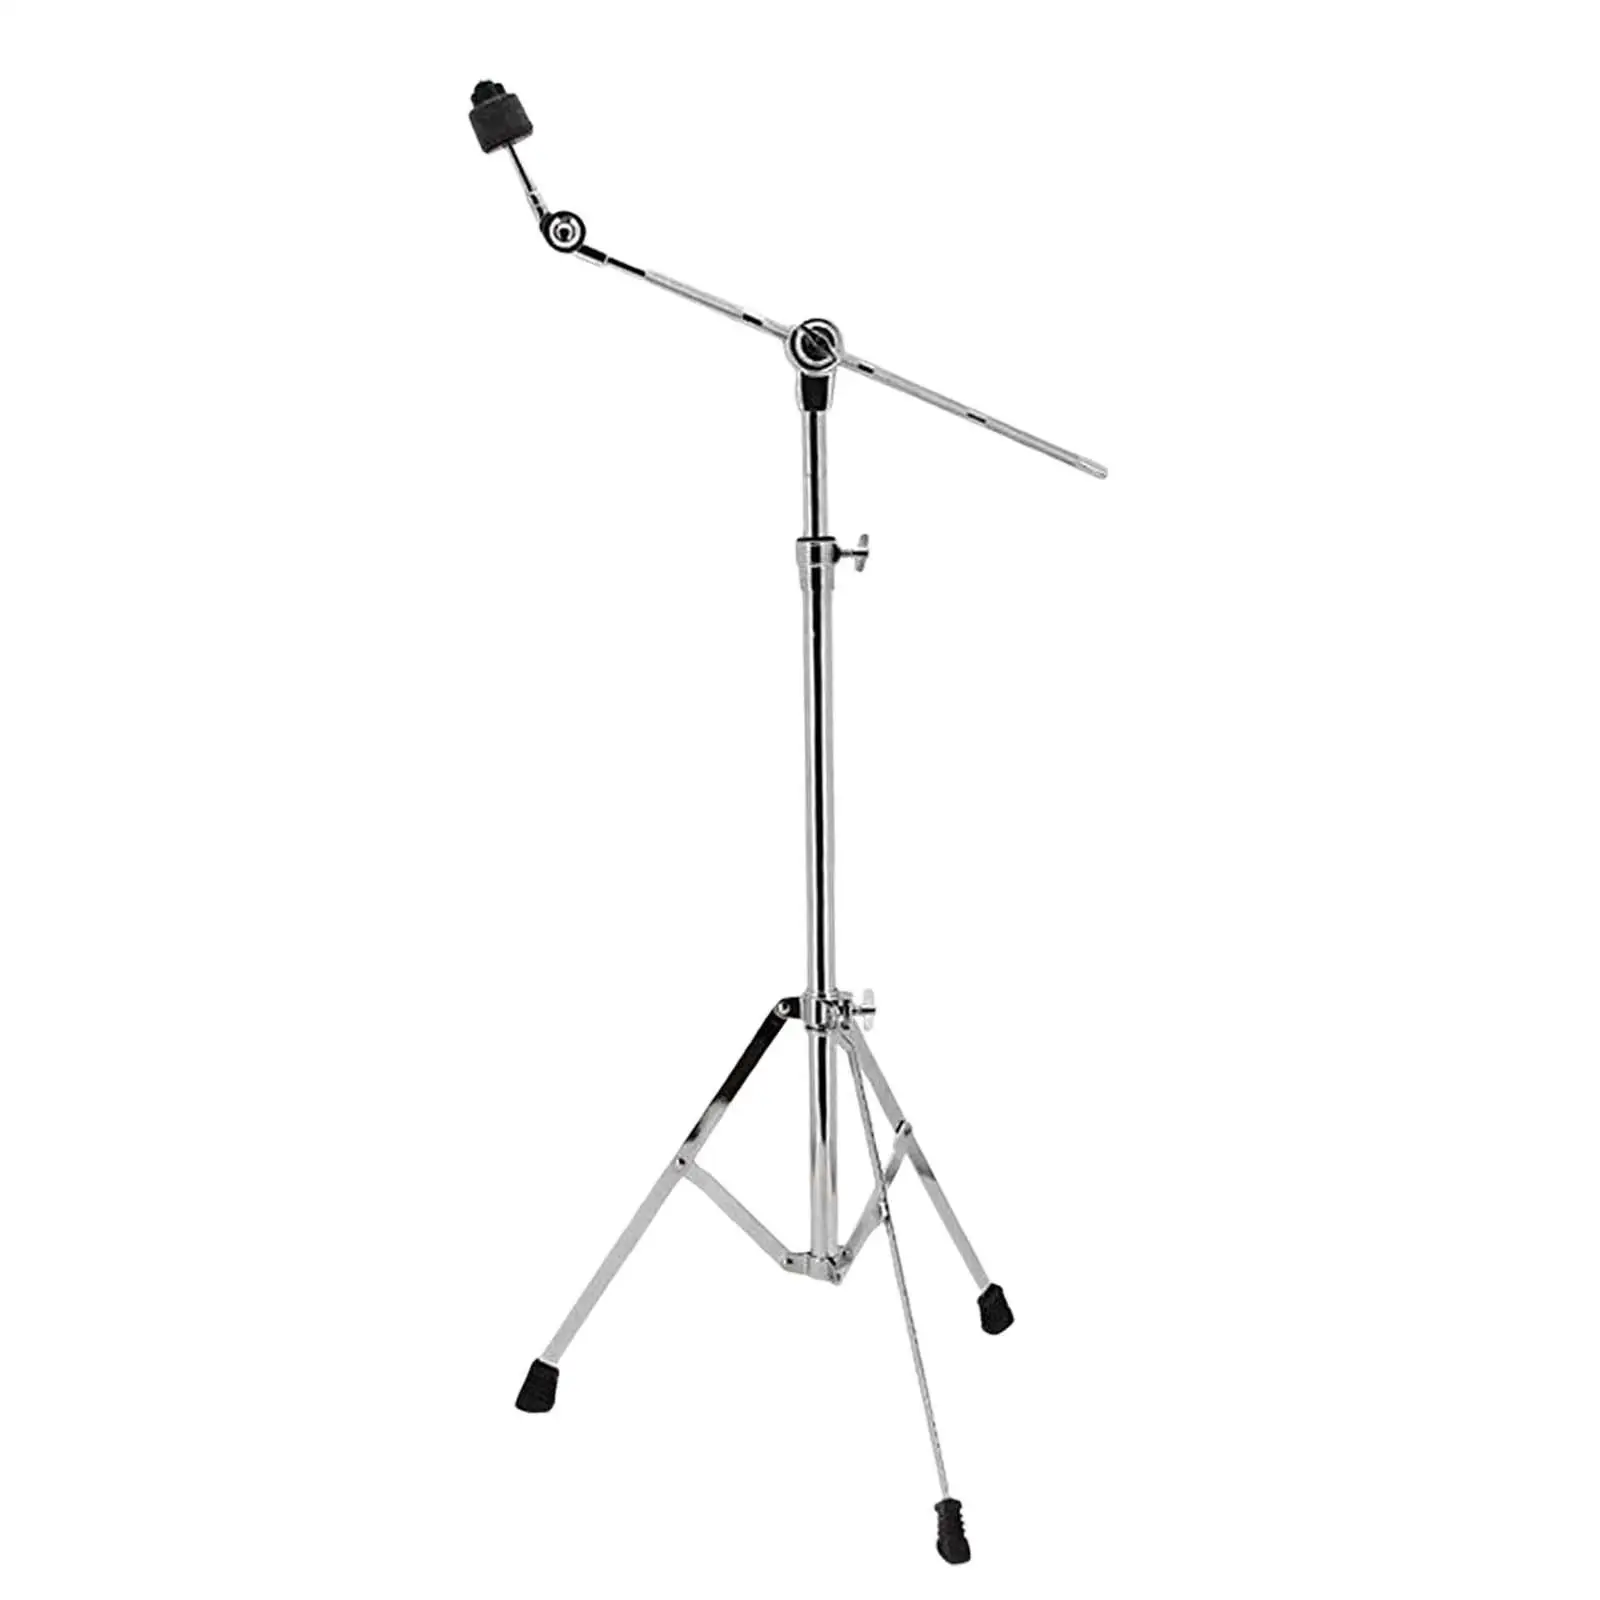 Adjustable Floor Drum Stand Holder Foldable Floor Triangle Bracket Percussion Accessories Dual Purpose Stand for General Playing